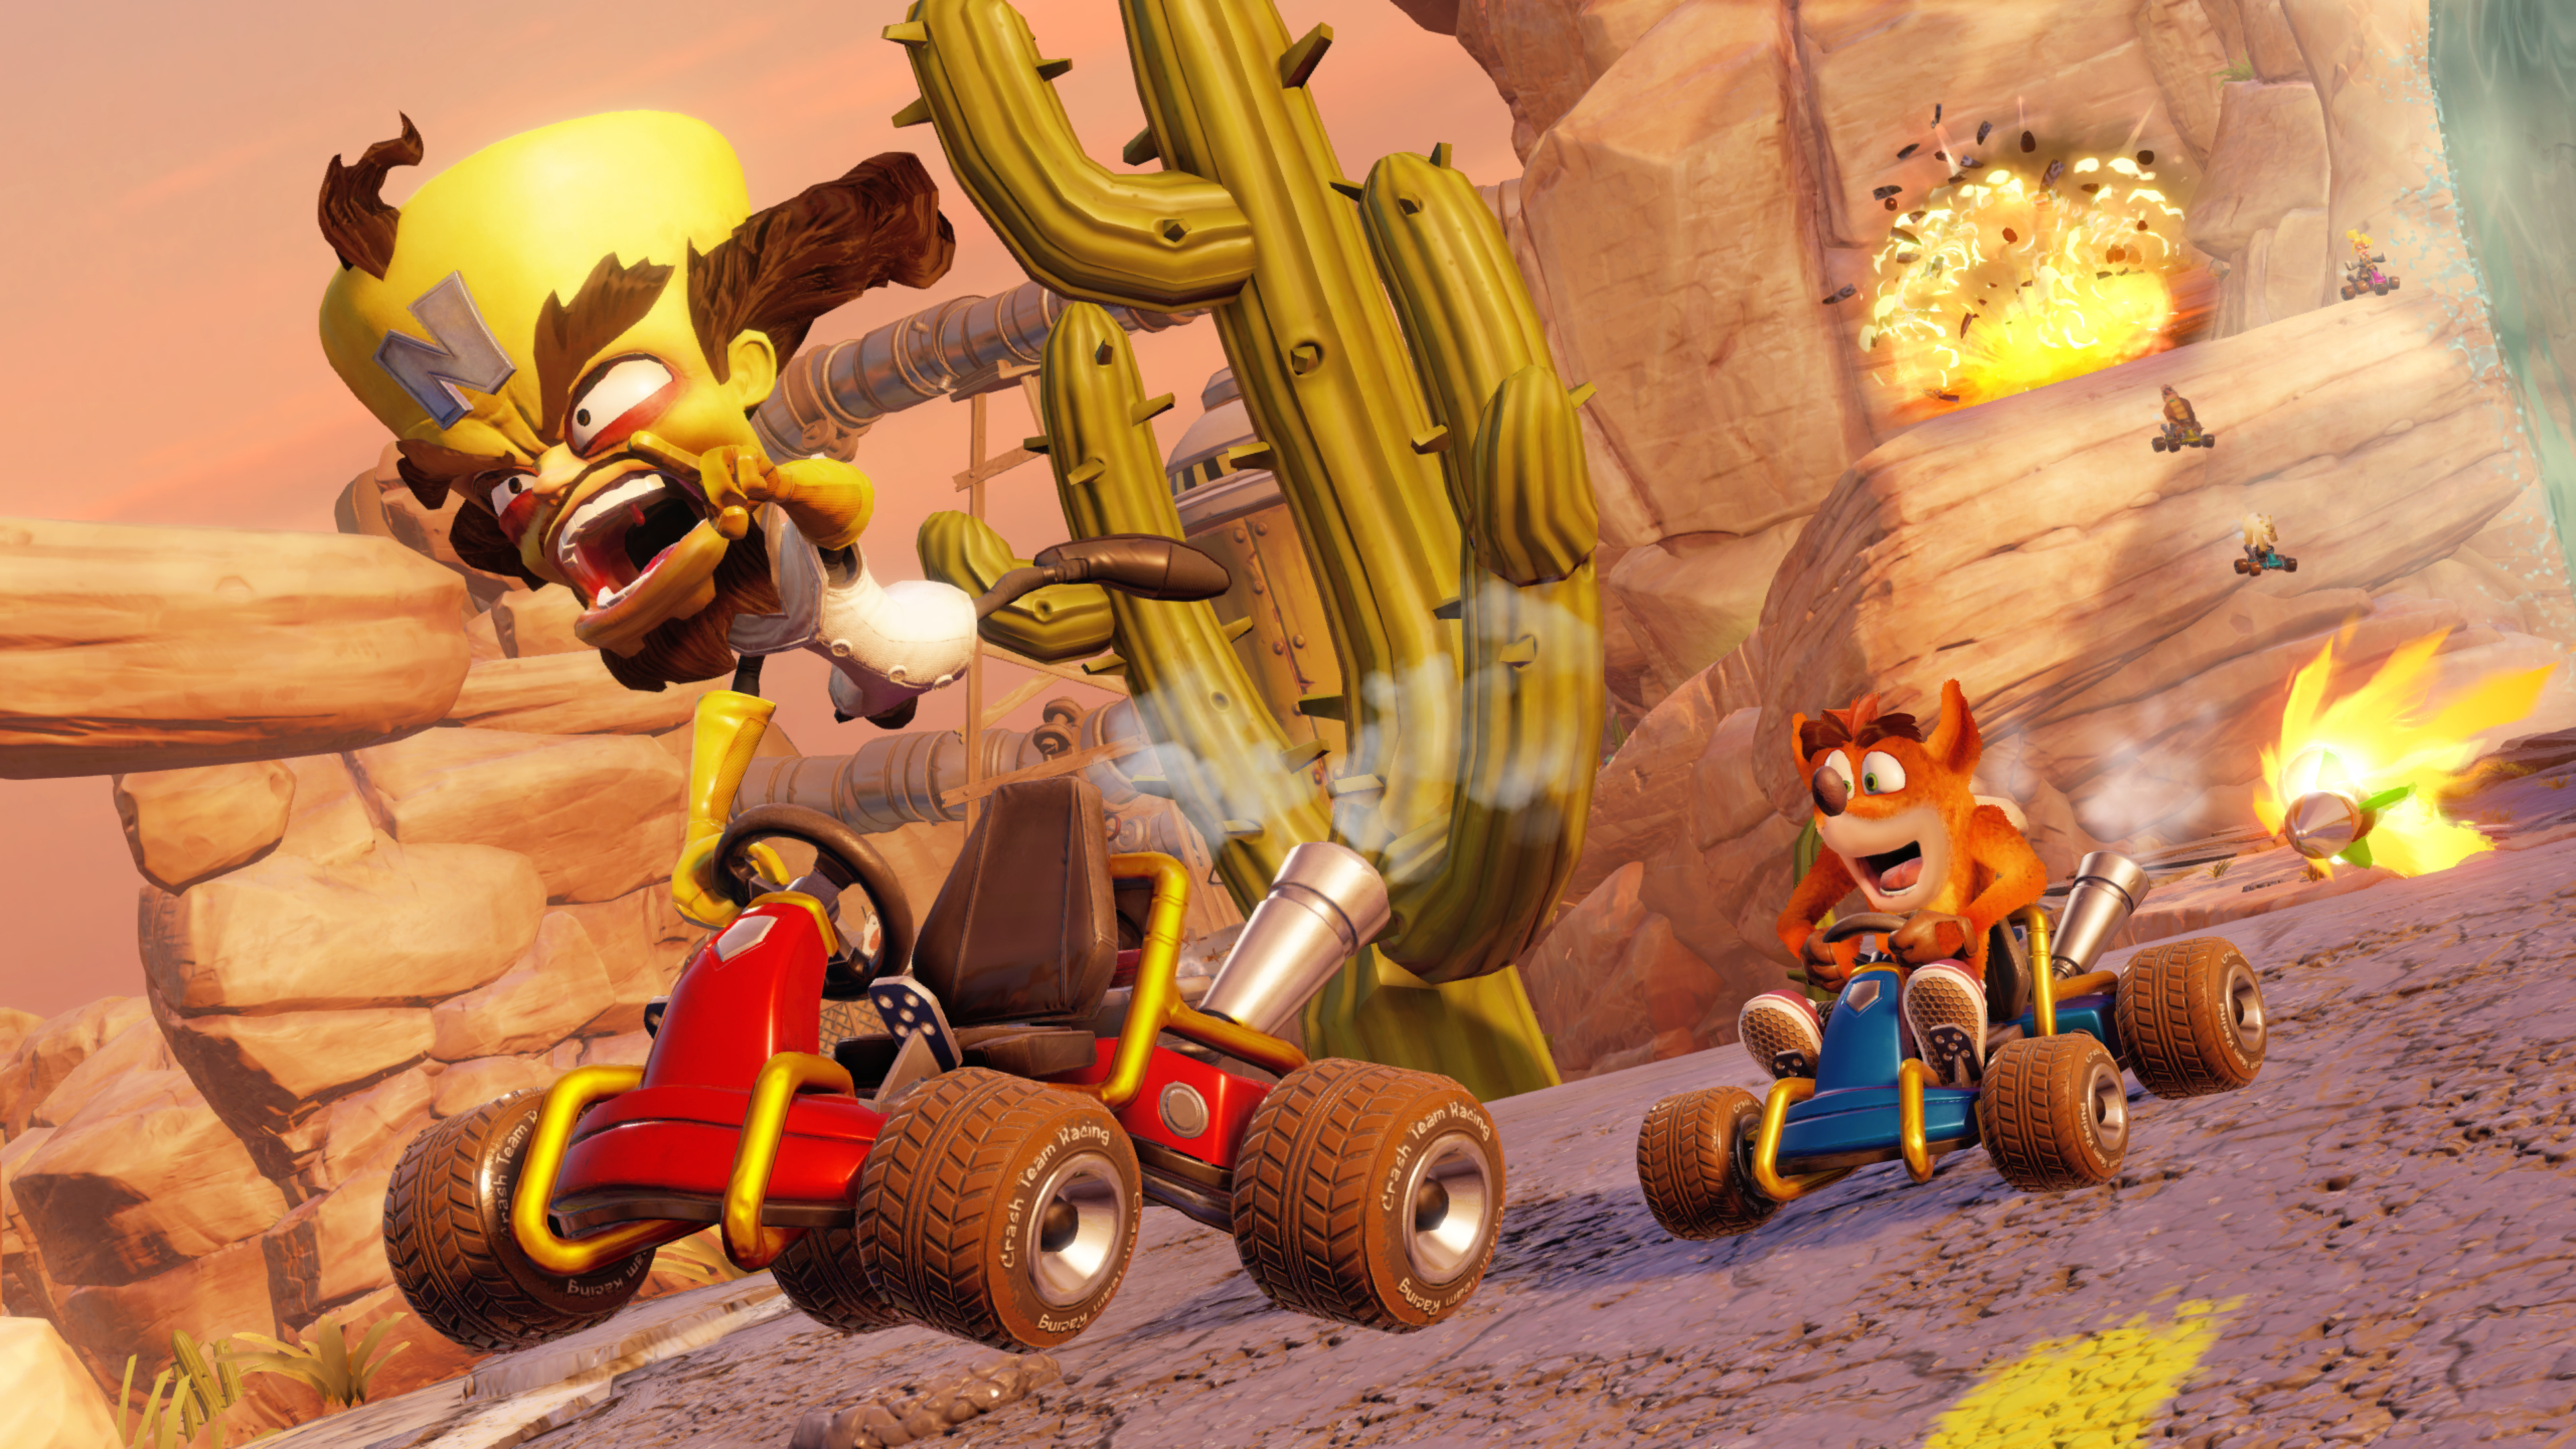 Crash Team Racing Nitro-Fueled is a chaotic and lovingly crafted remaster of a kart racing classic